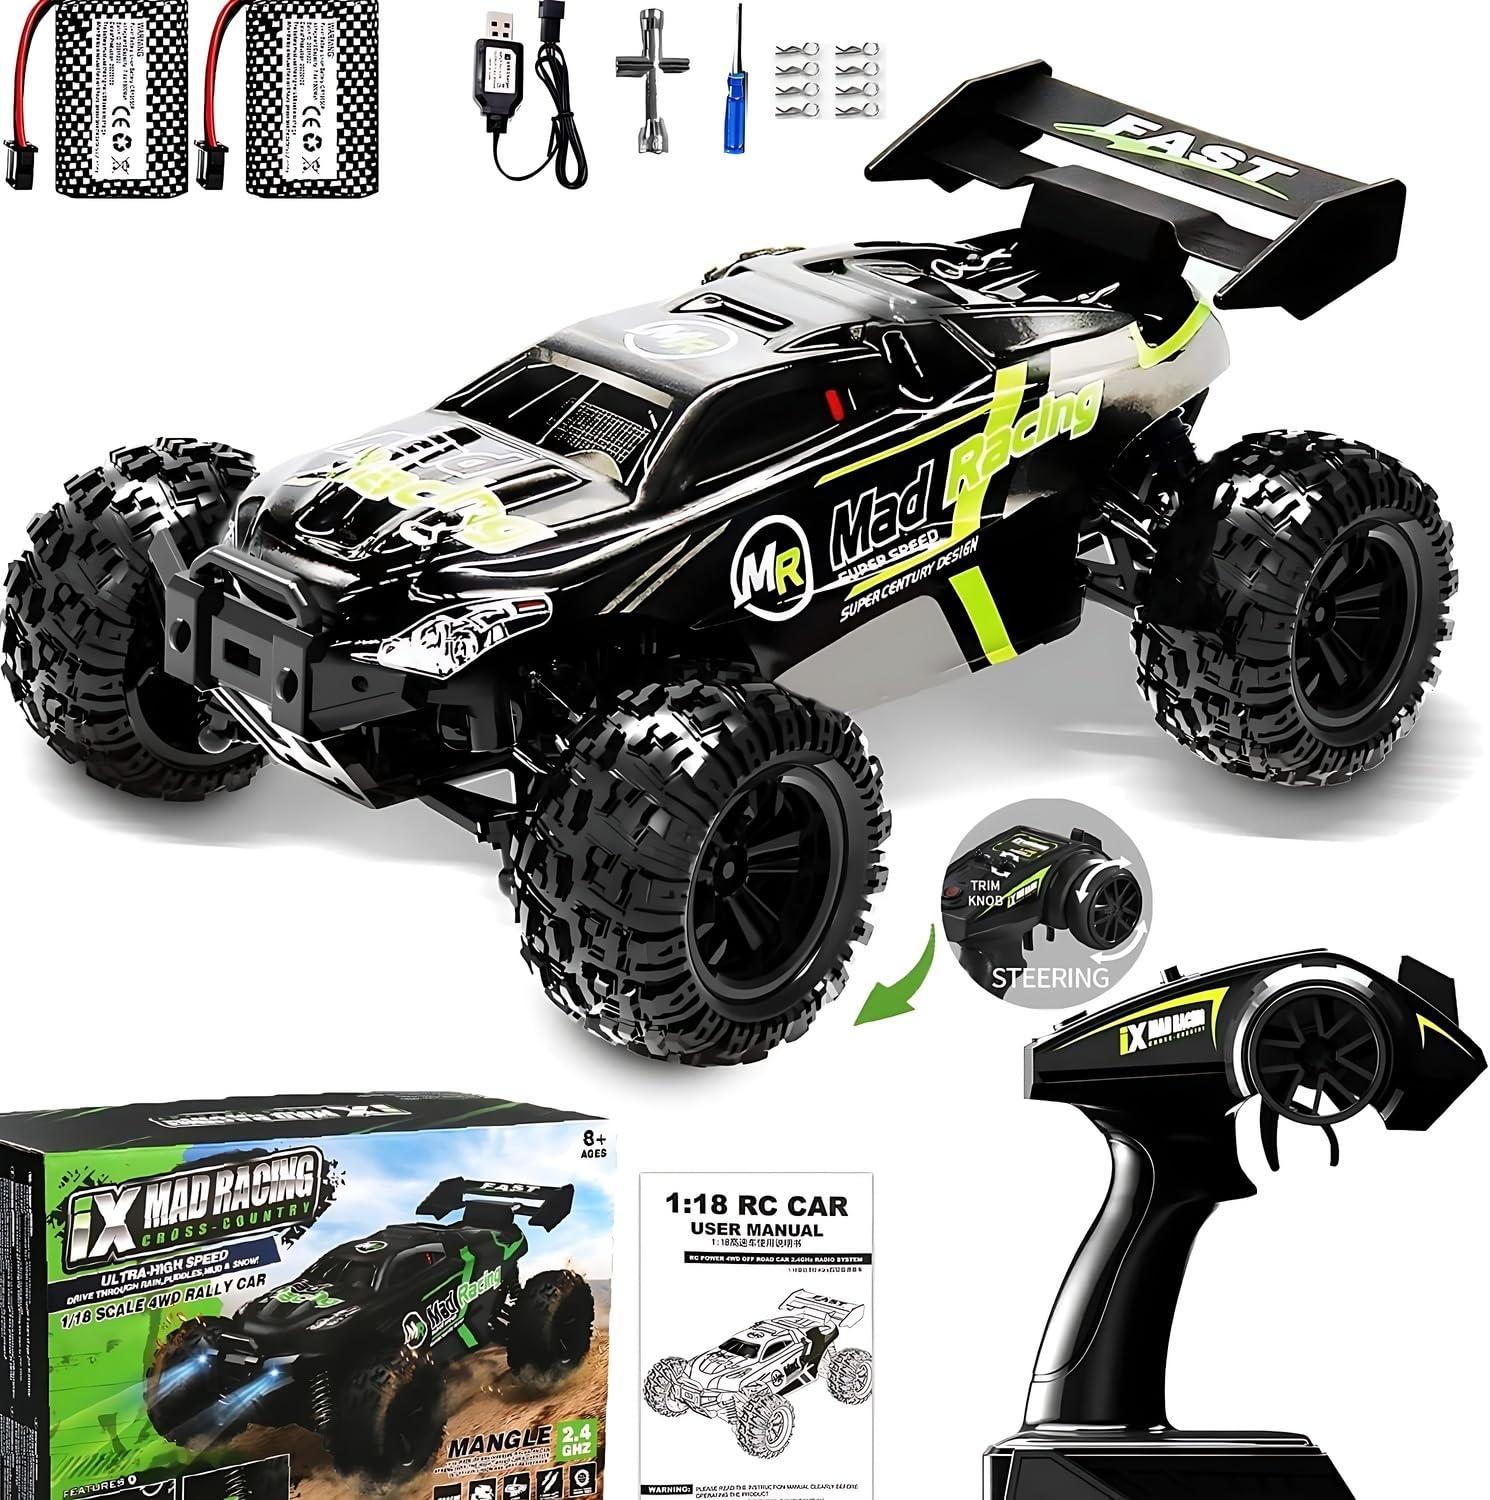 Electric Racing Rc Cars: Advancements in Technology and Design